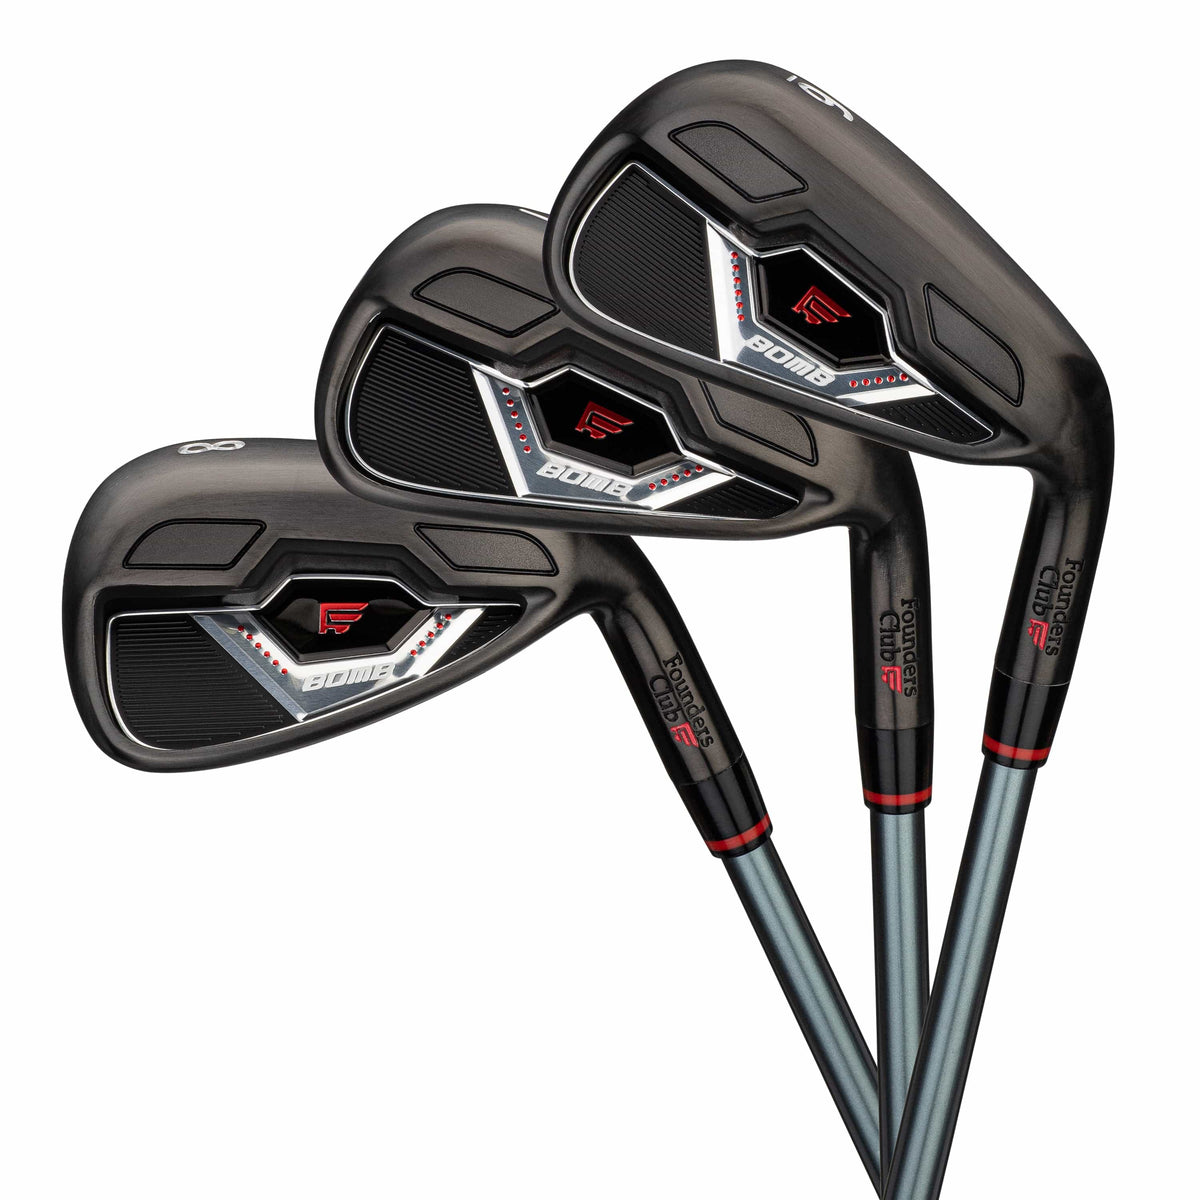 Founders Club Bomb Combo Irons Graphite Golf Set 3-PW Plus Free Sand Wedge